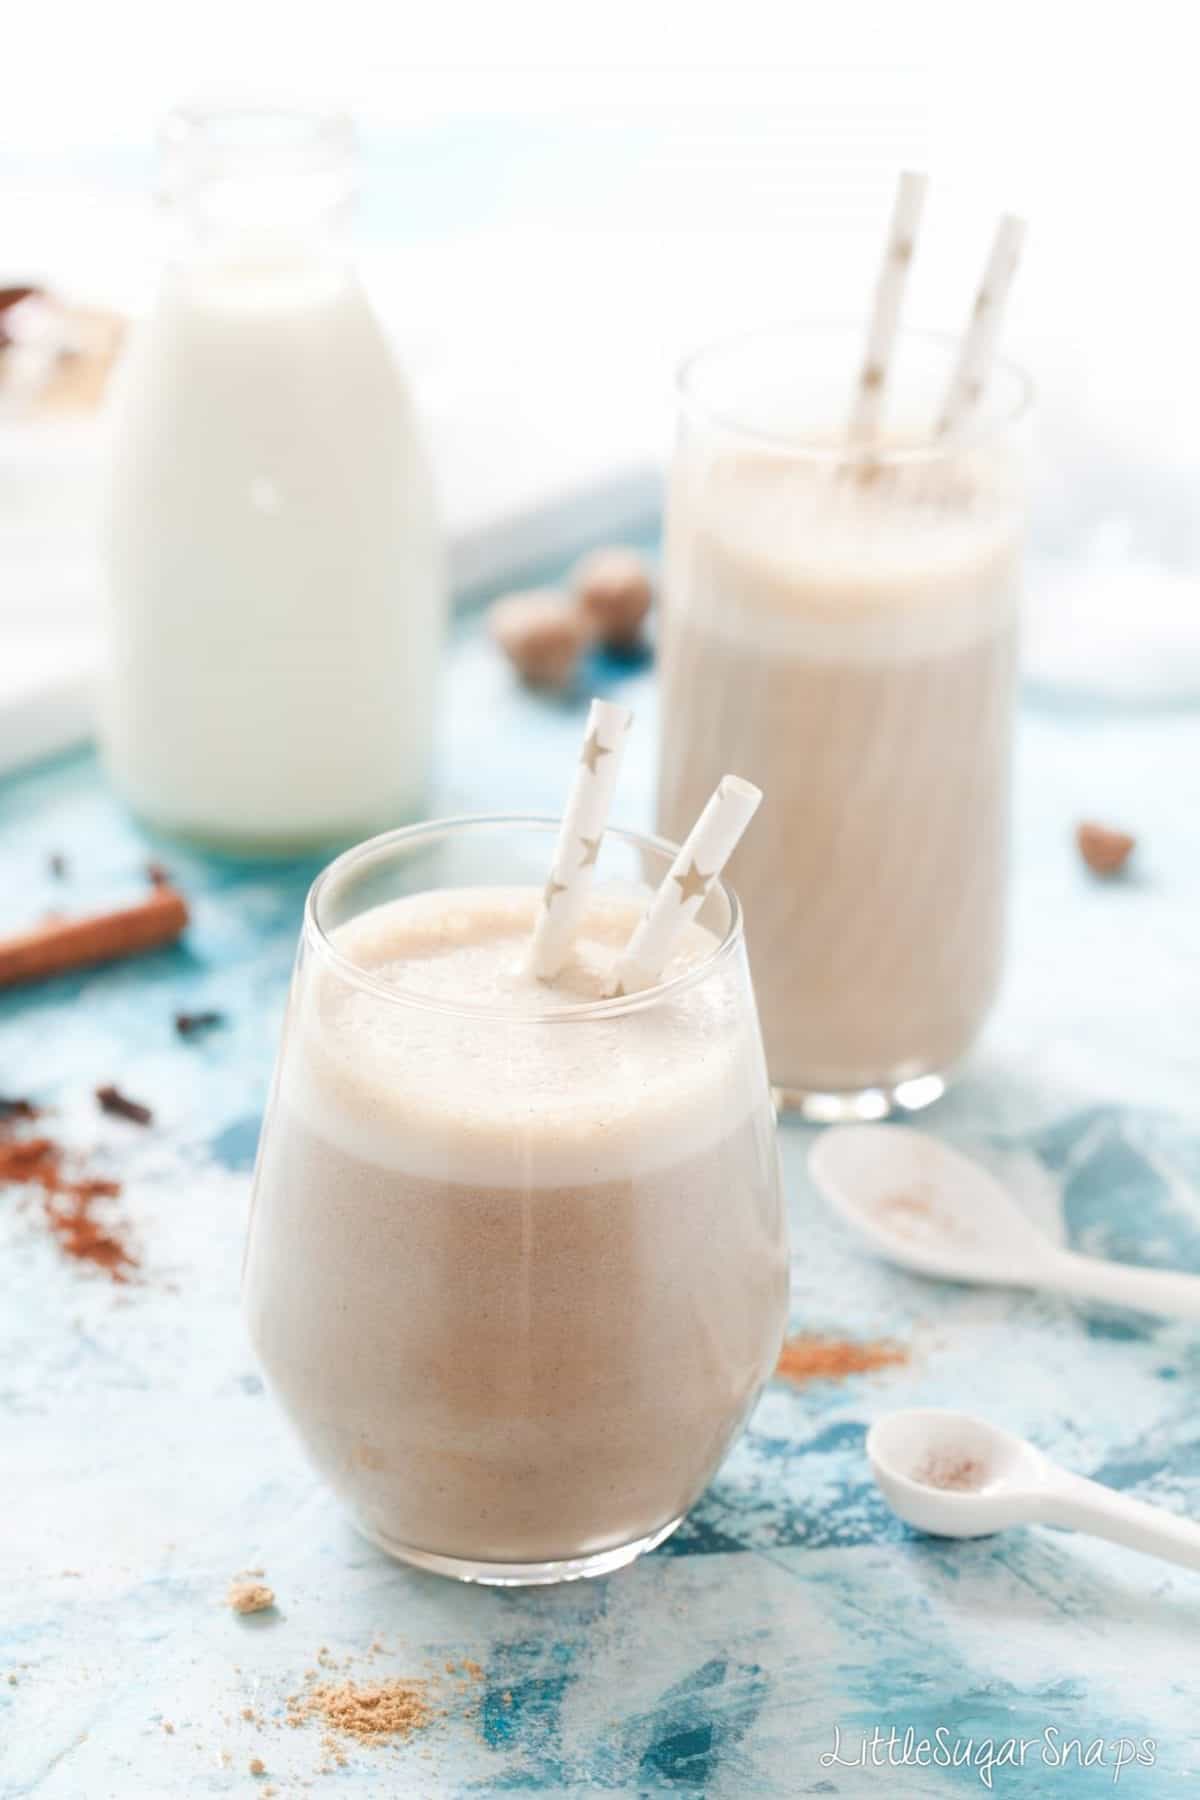 A date shake flavoured with gingerbread spices.